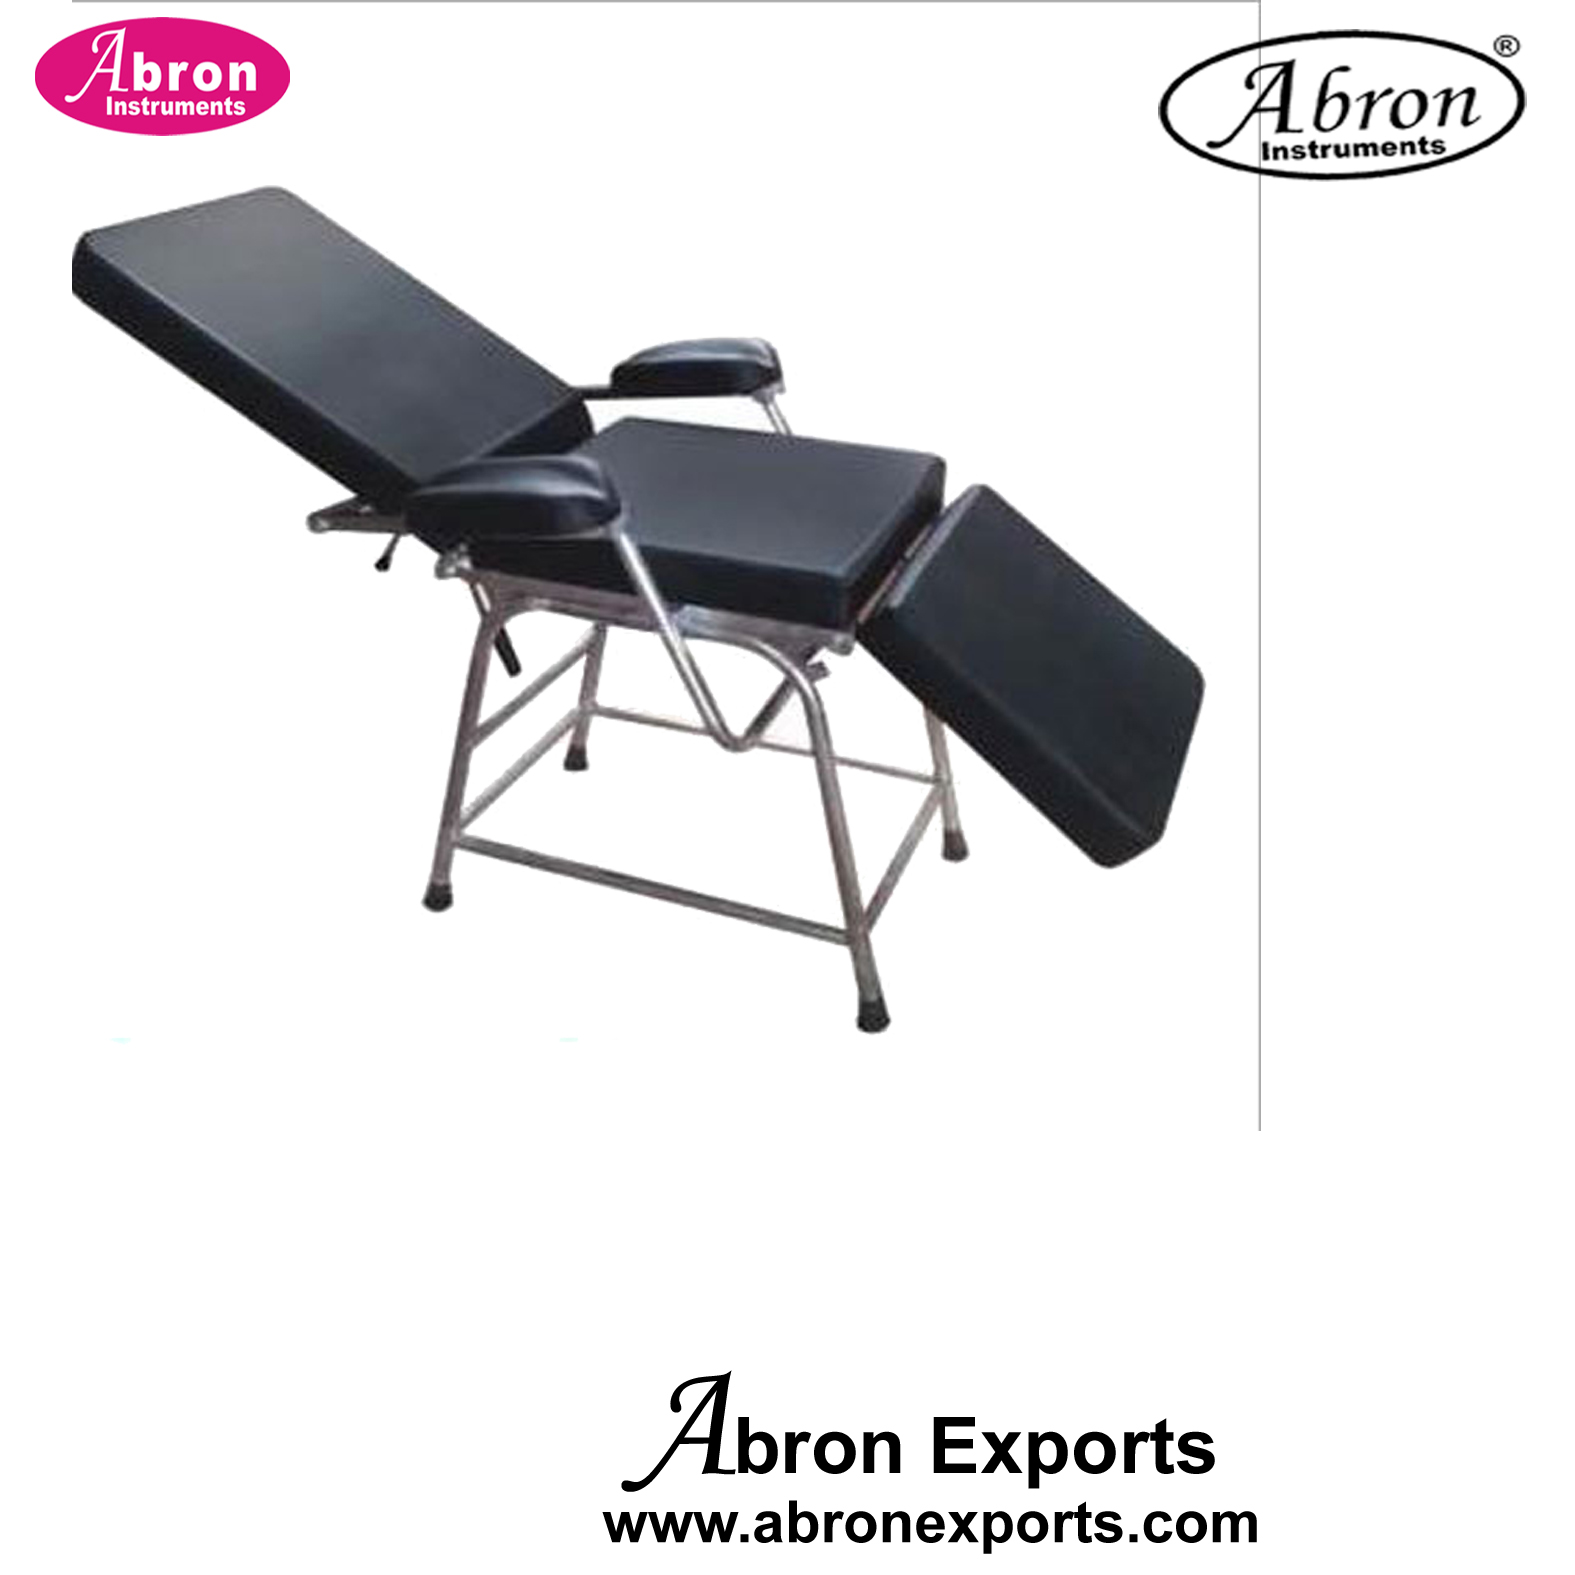 Examination Table Couch Blood Collection Table Examination with matress Hospital Nursing Home Surgical Abron ABM-2713ECH